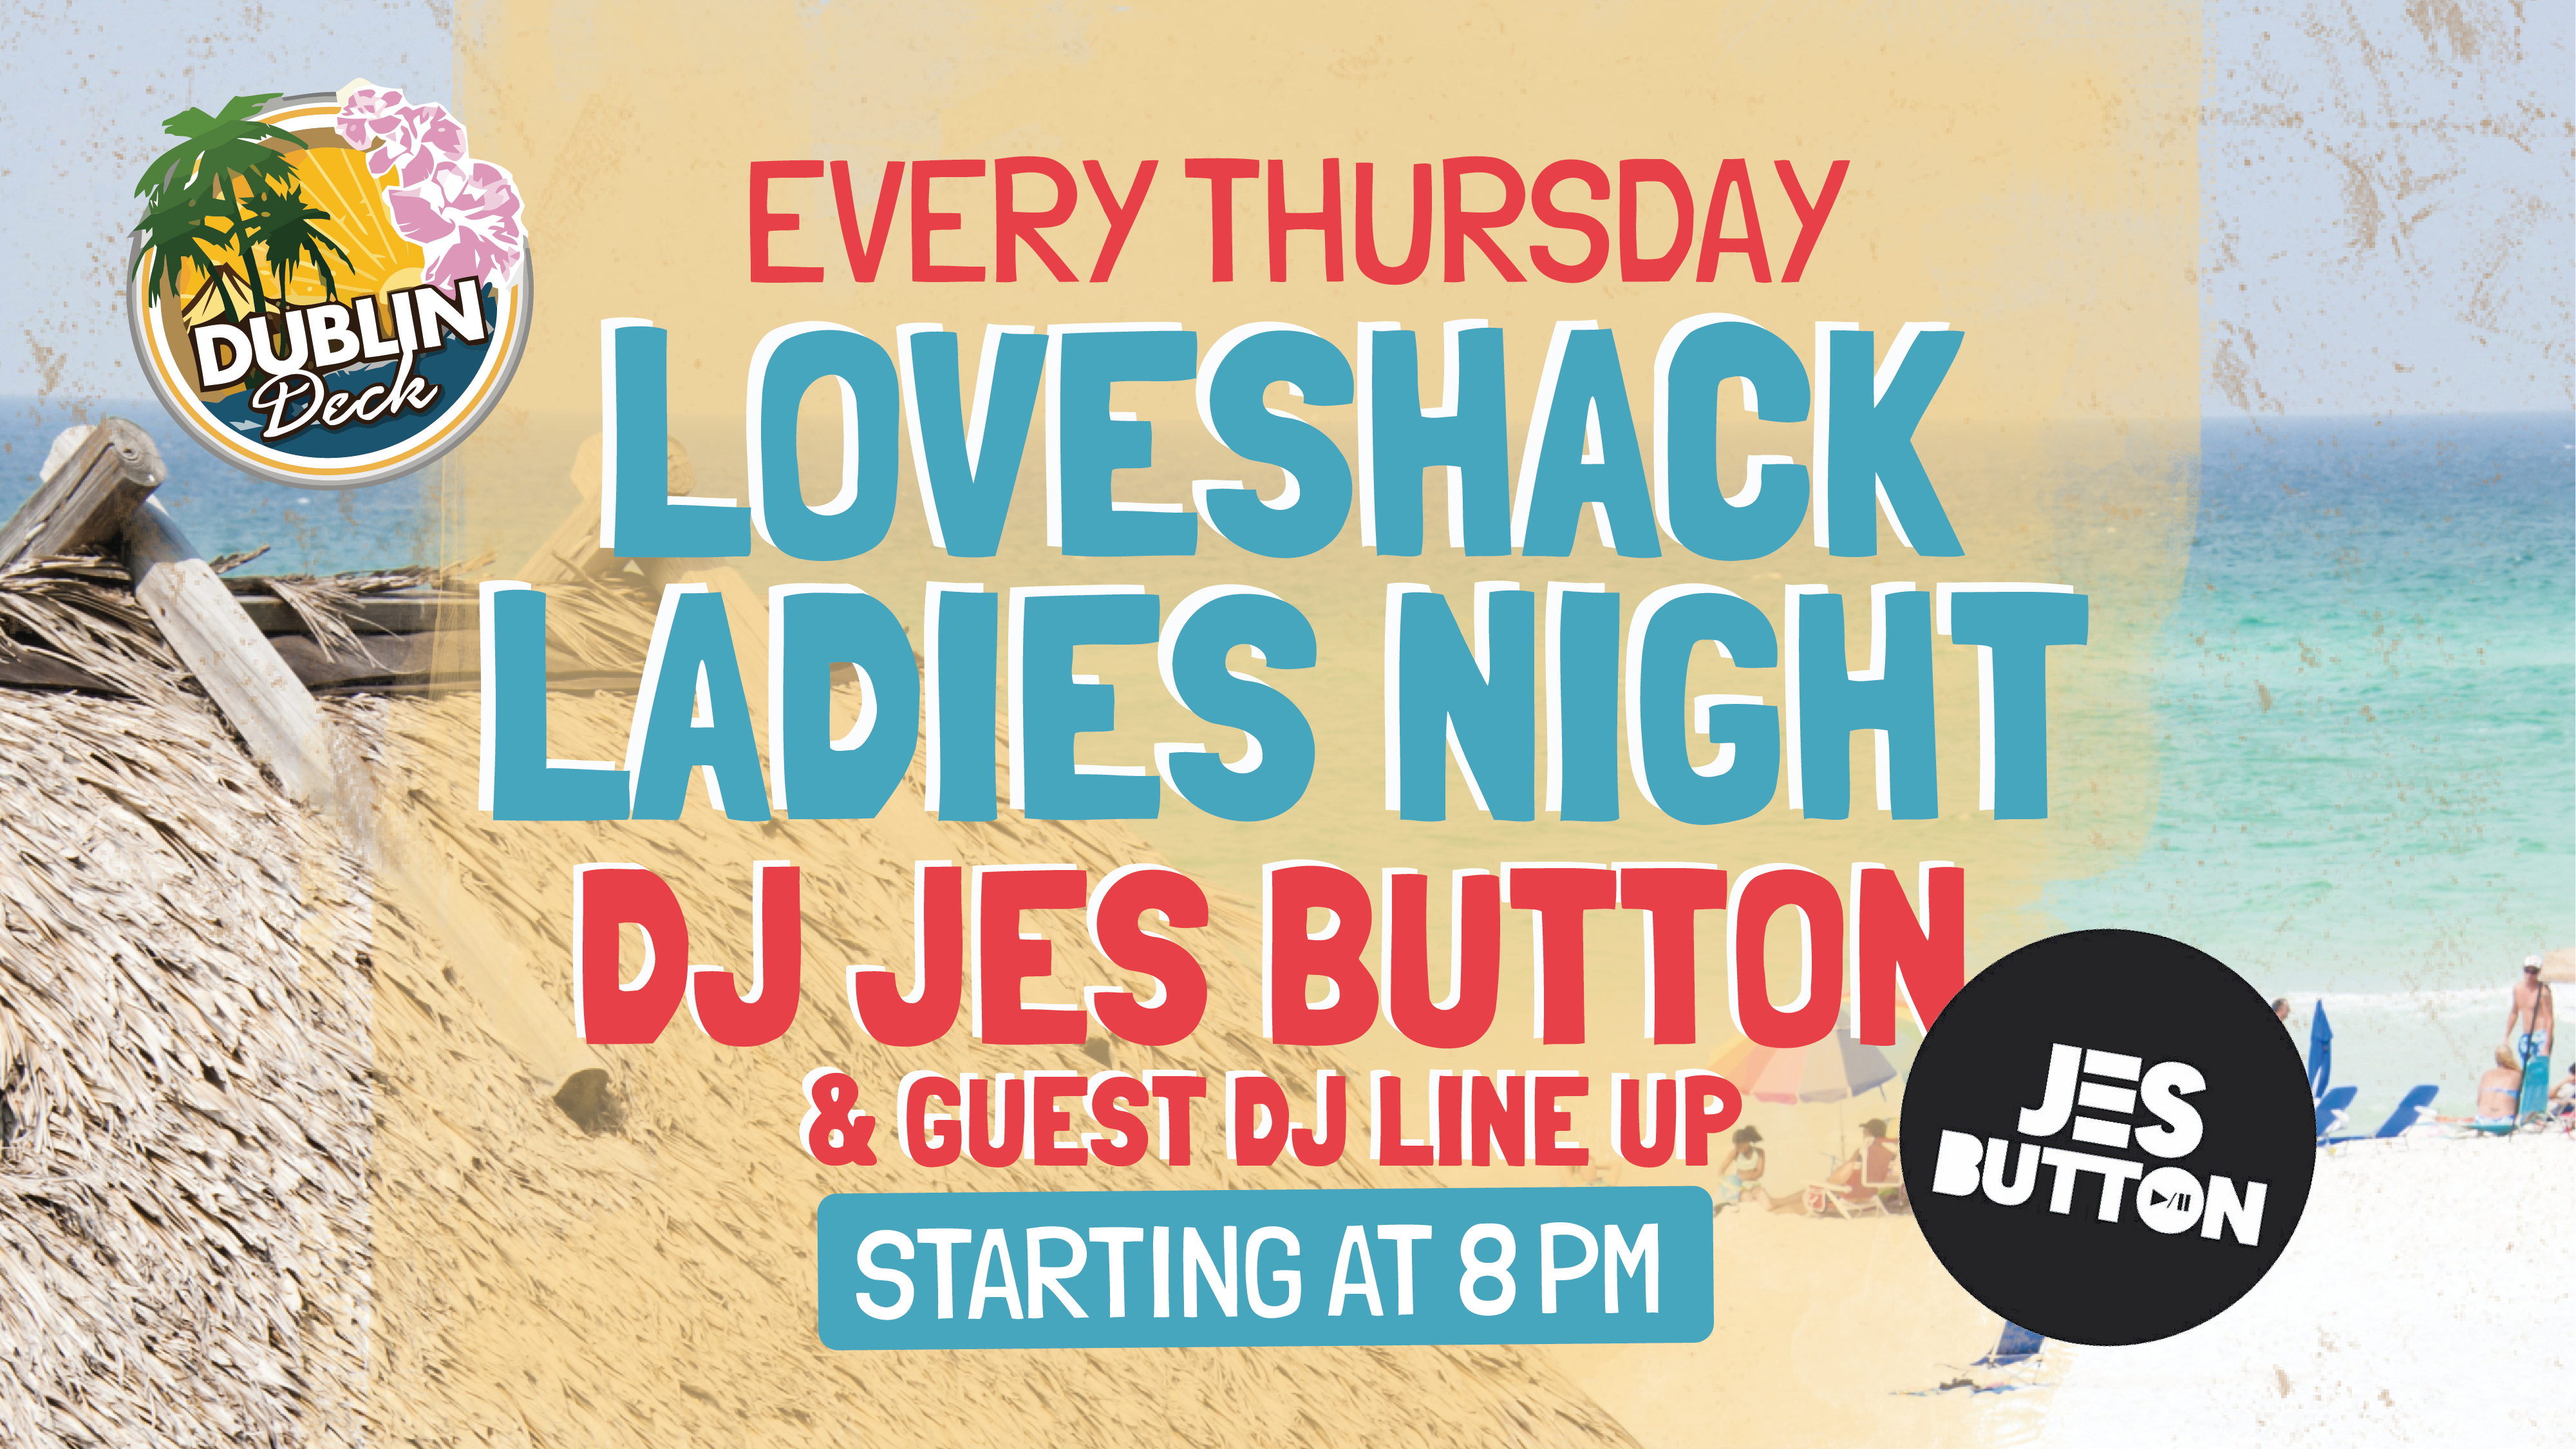 Live Music with DJ Jes Button every Thursday